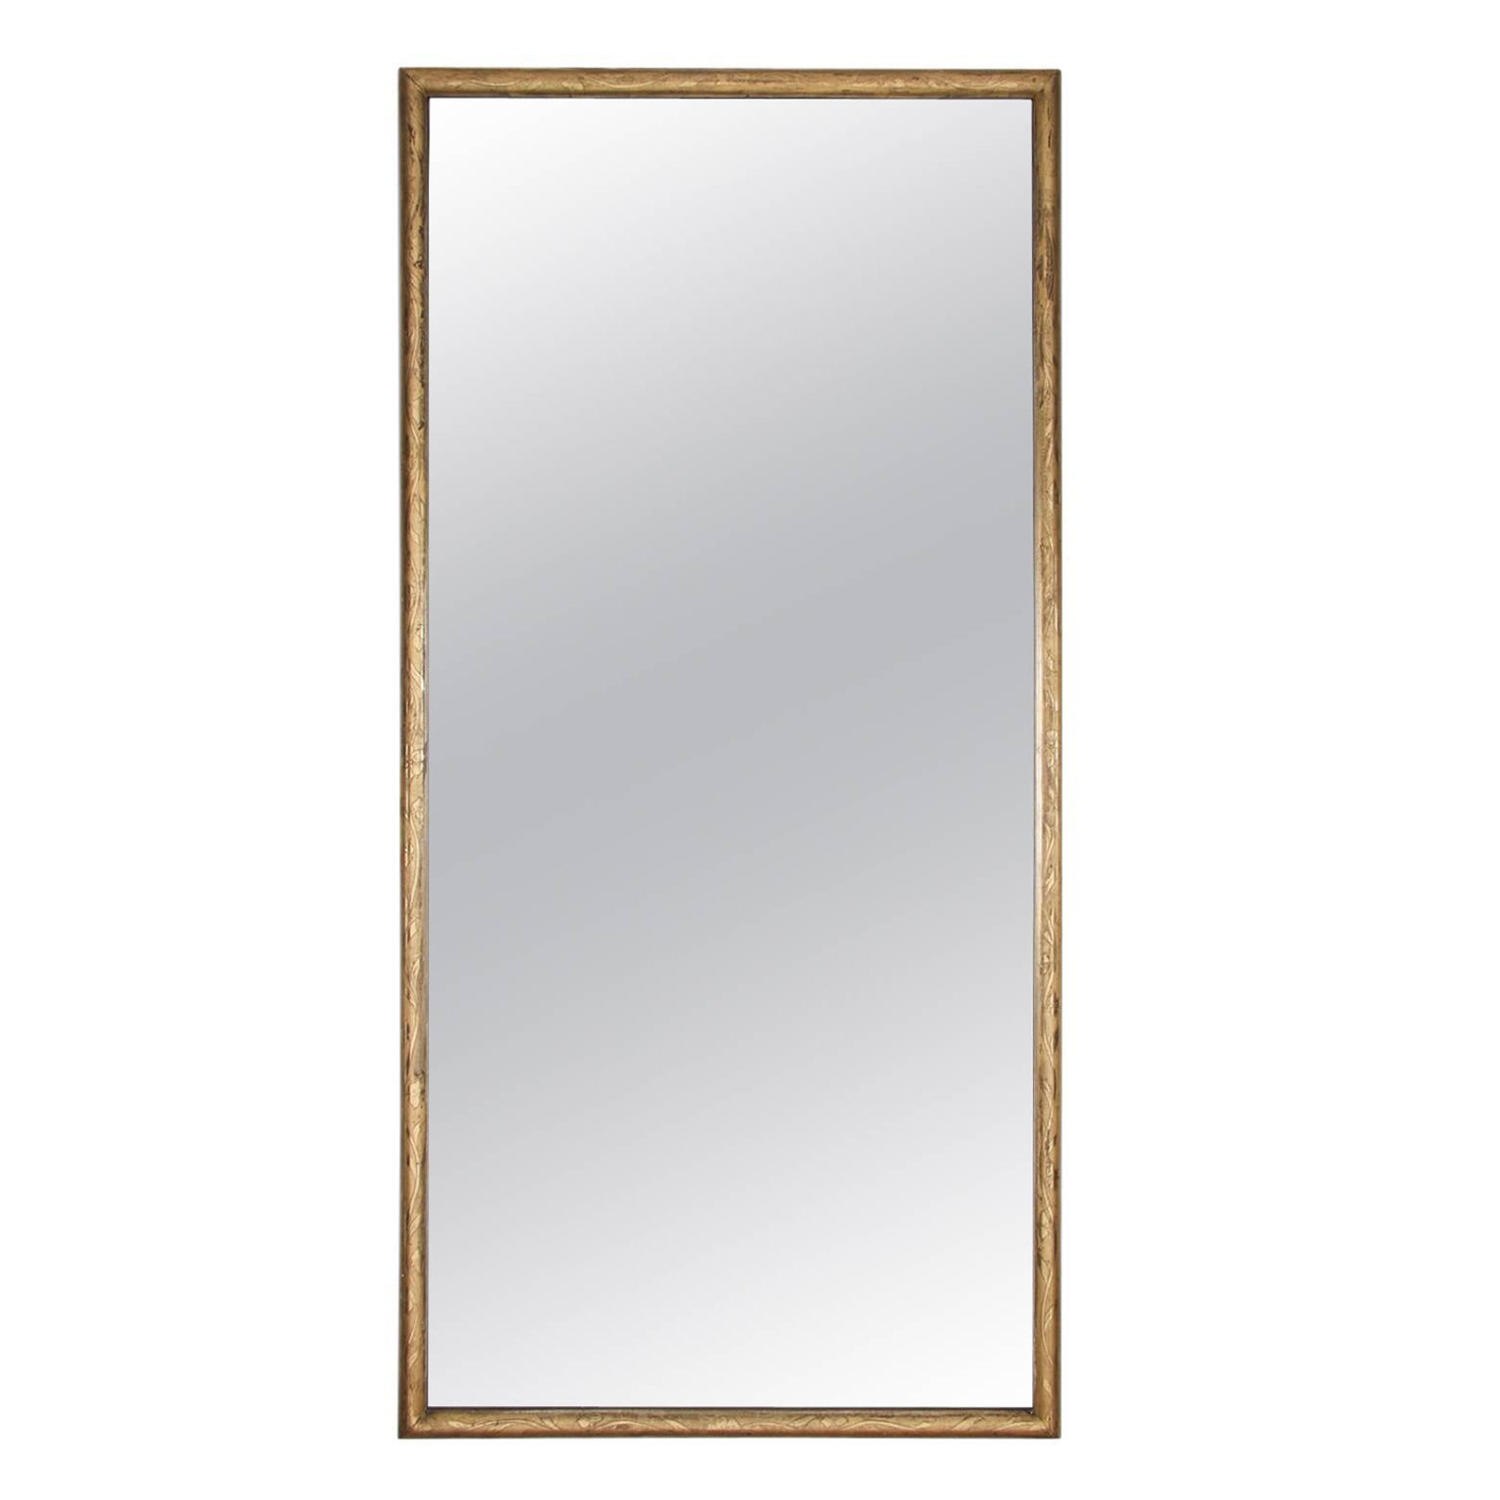 Giltwood Mirror with Floral Detail